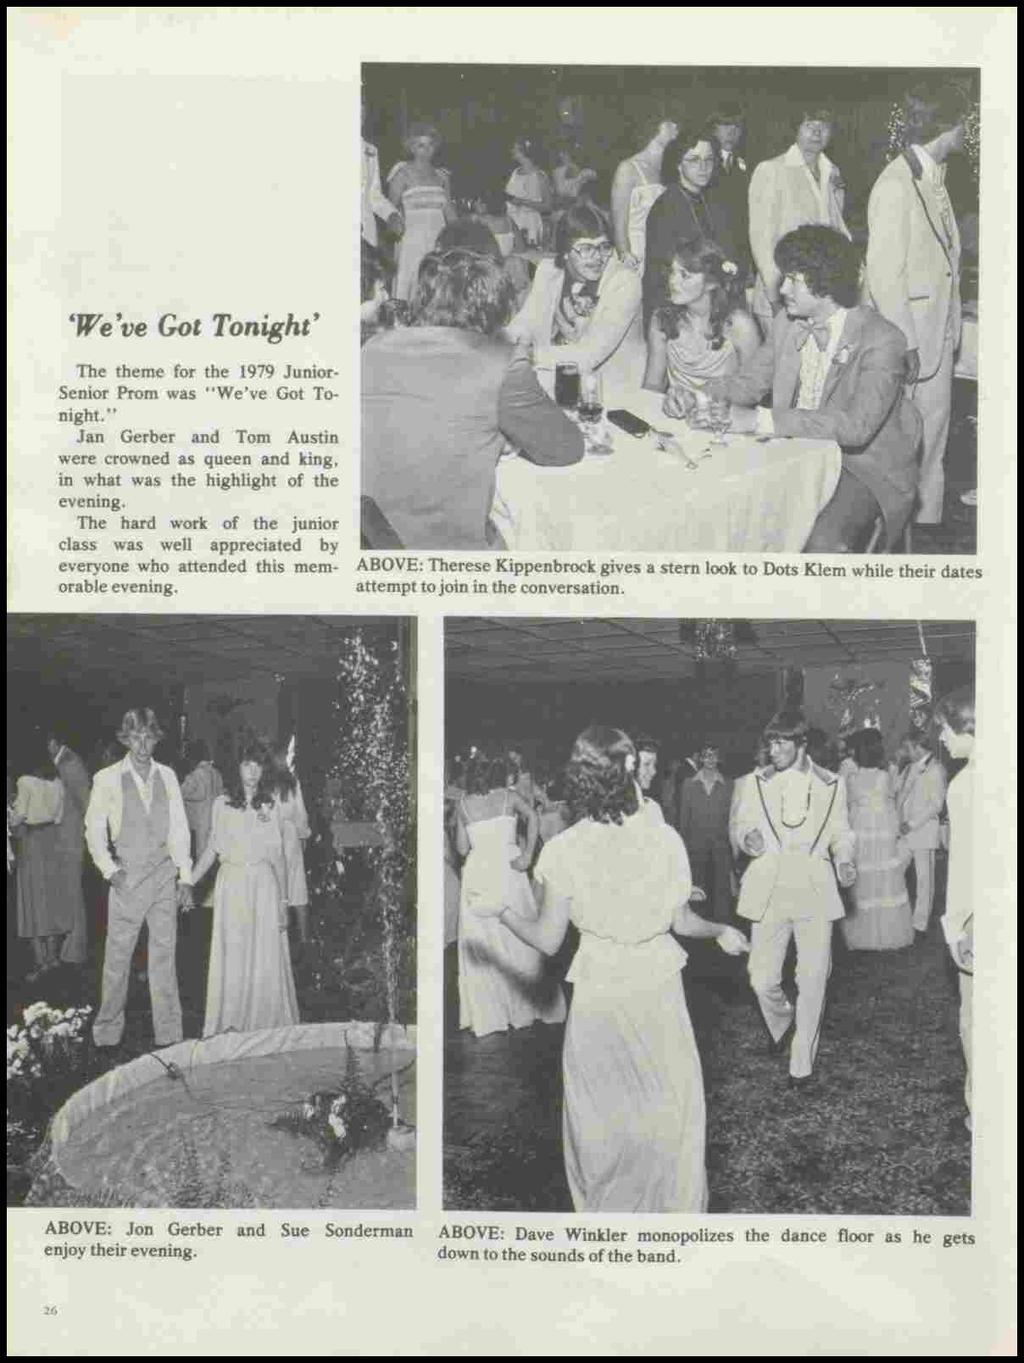 'We've Got Tonight' The theme for the 1979 Junior Senior Prom was "We've Got Tonight." Jan Gerber and Tom Austin were crowned as queen and king, in what was the highlight of the evening.